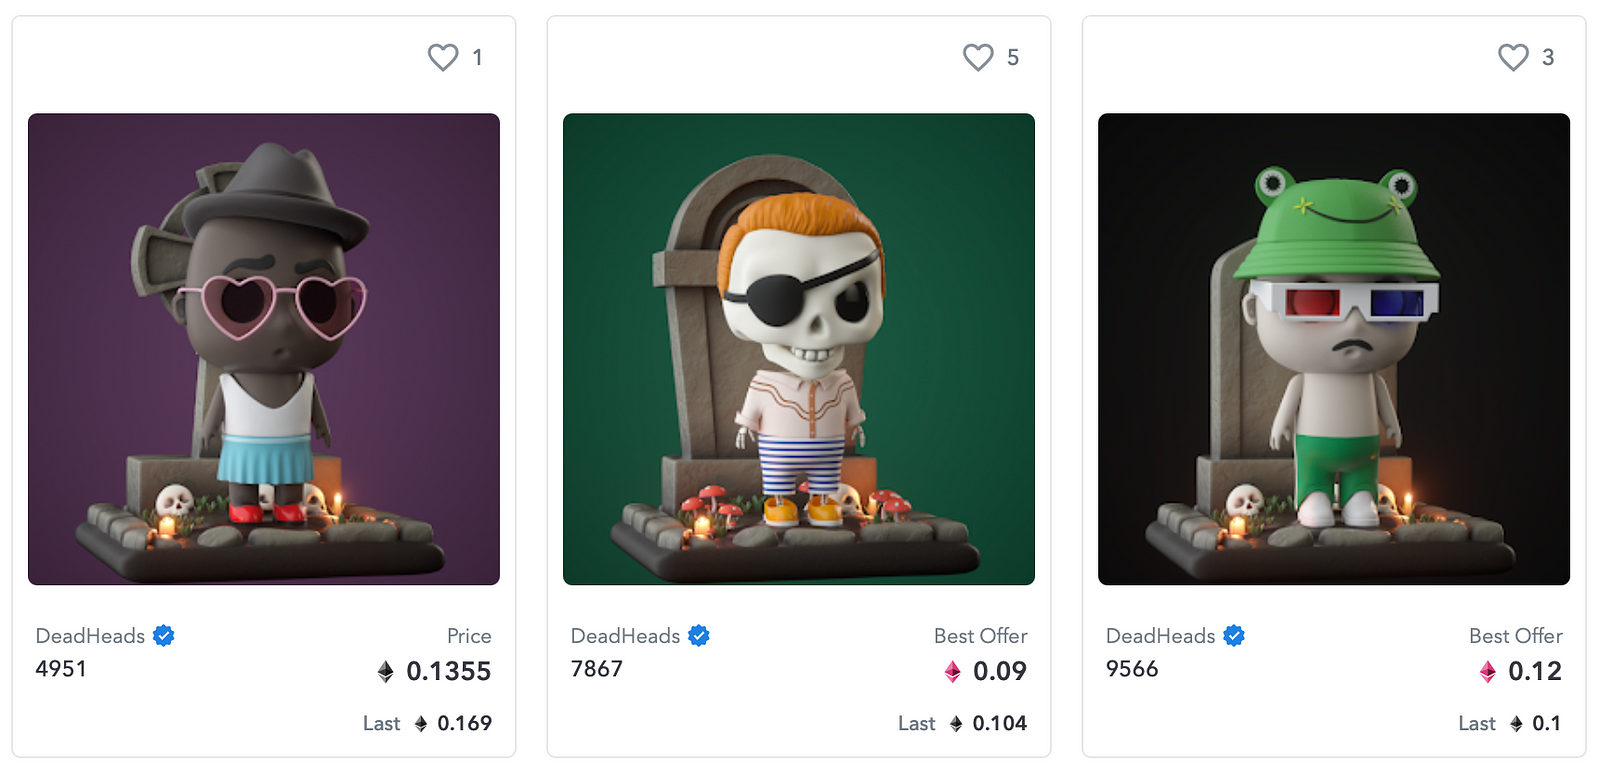 Three digital collectibles from the series ‘DeadHeads’, up for sale on OpenSea.io